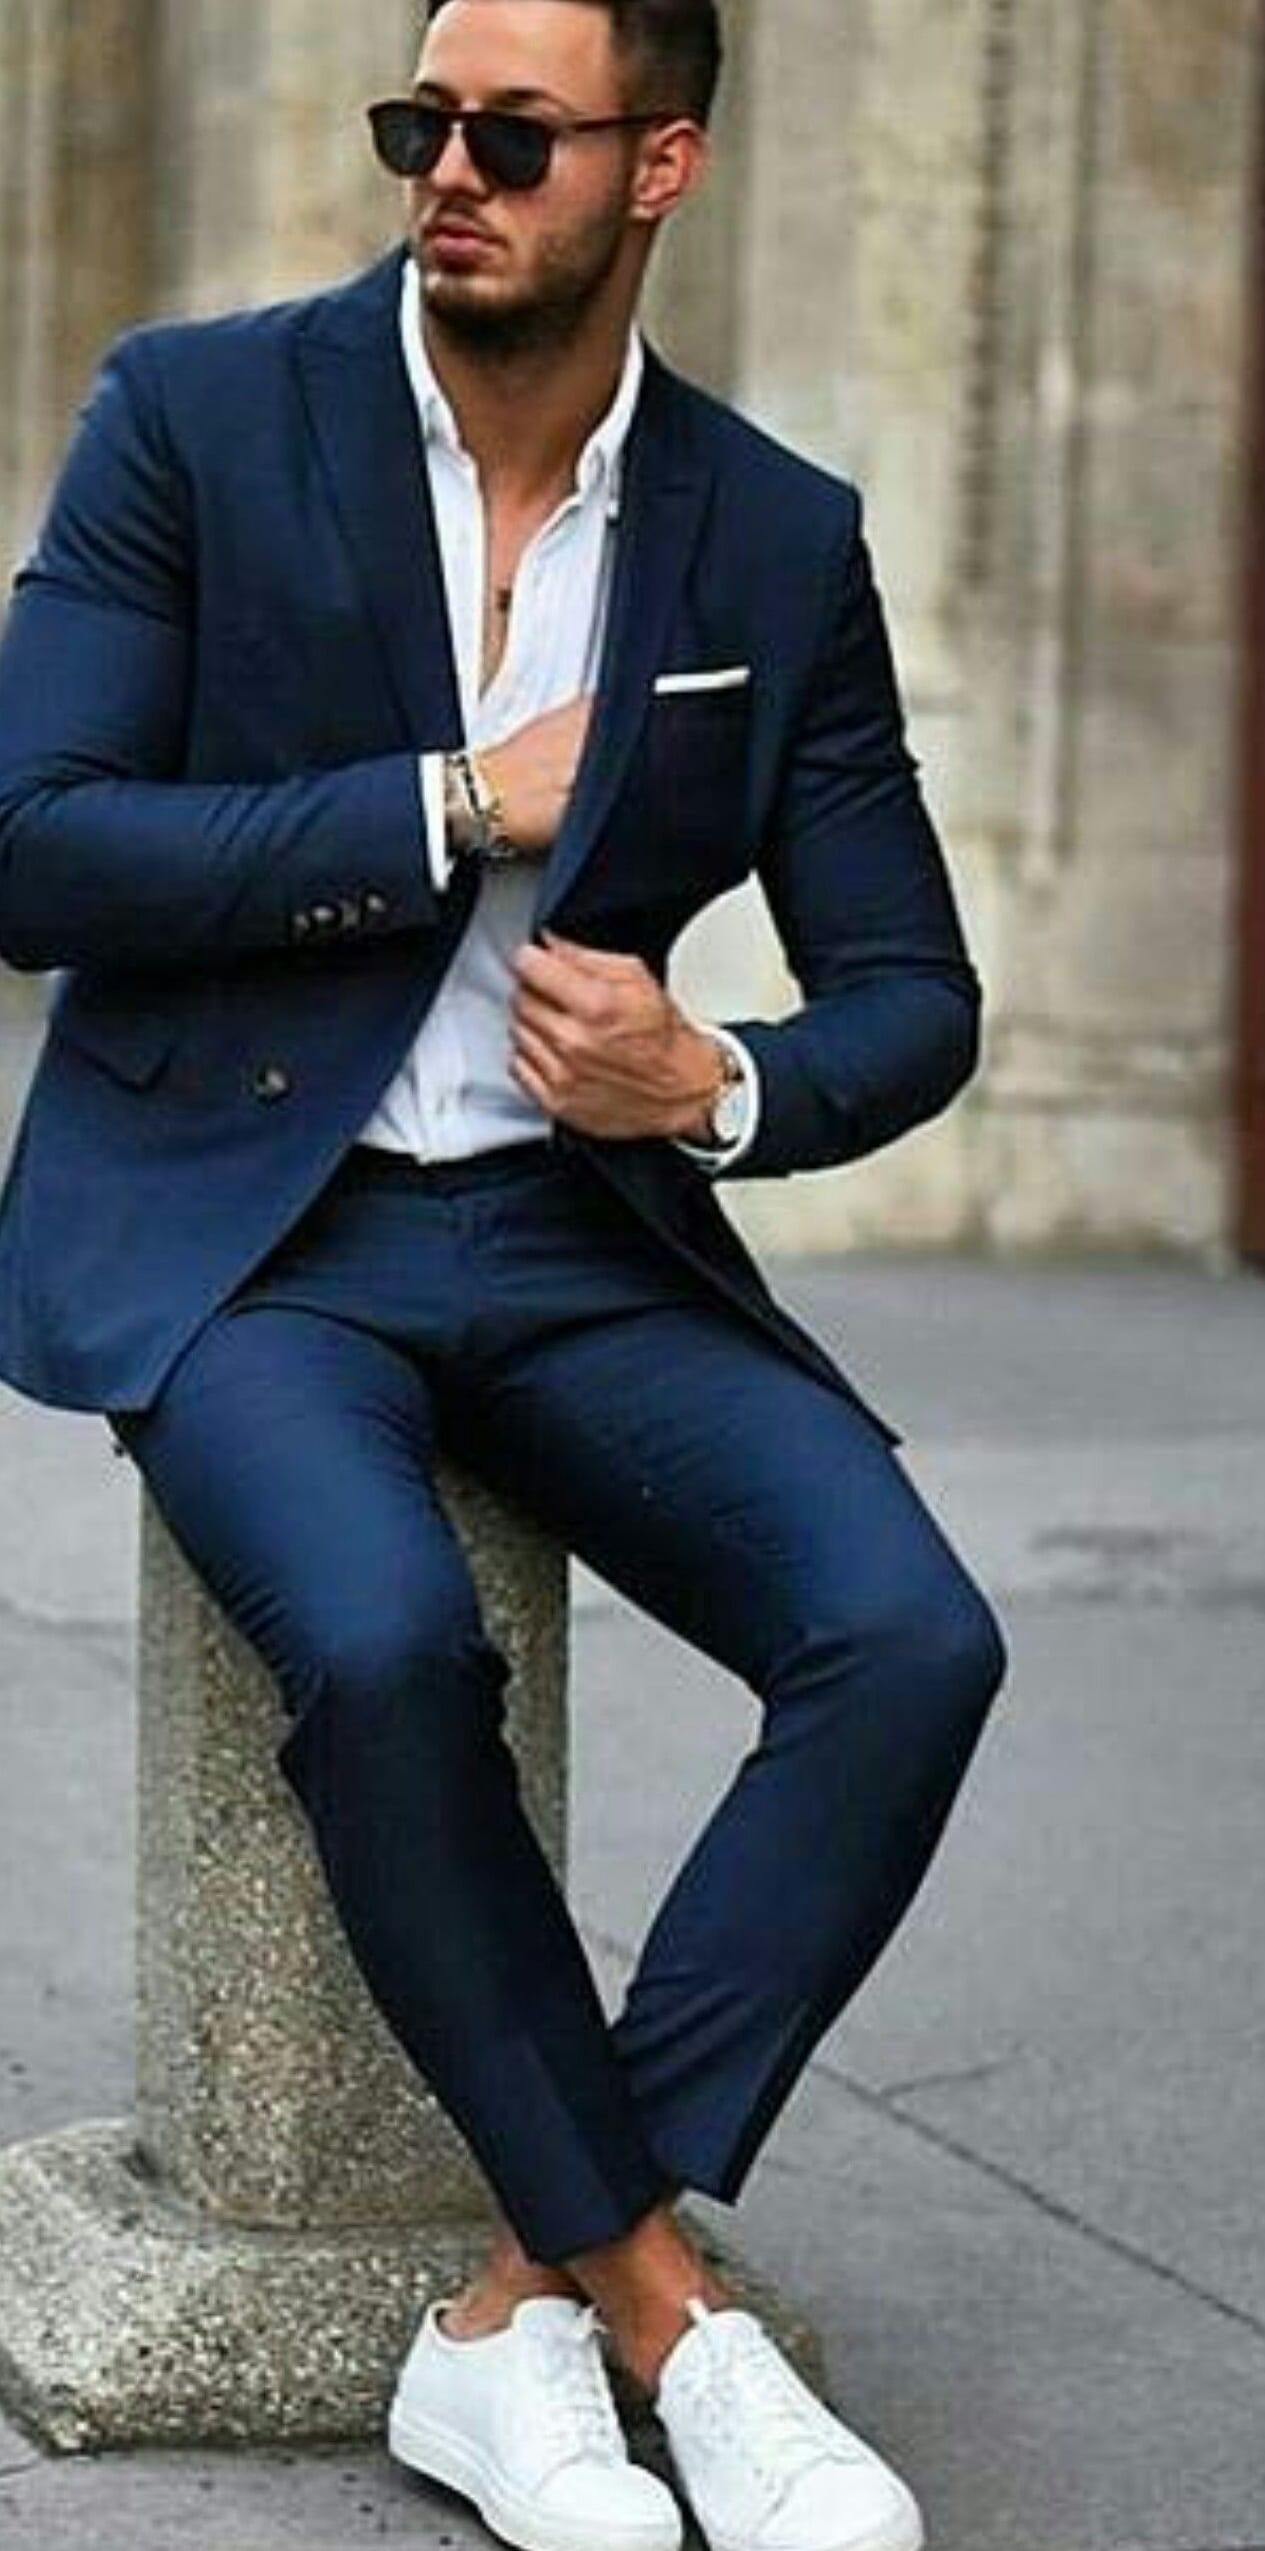 Full Suit- Blue Suit white shirt and white sneakers